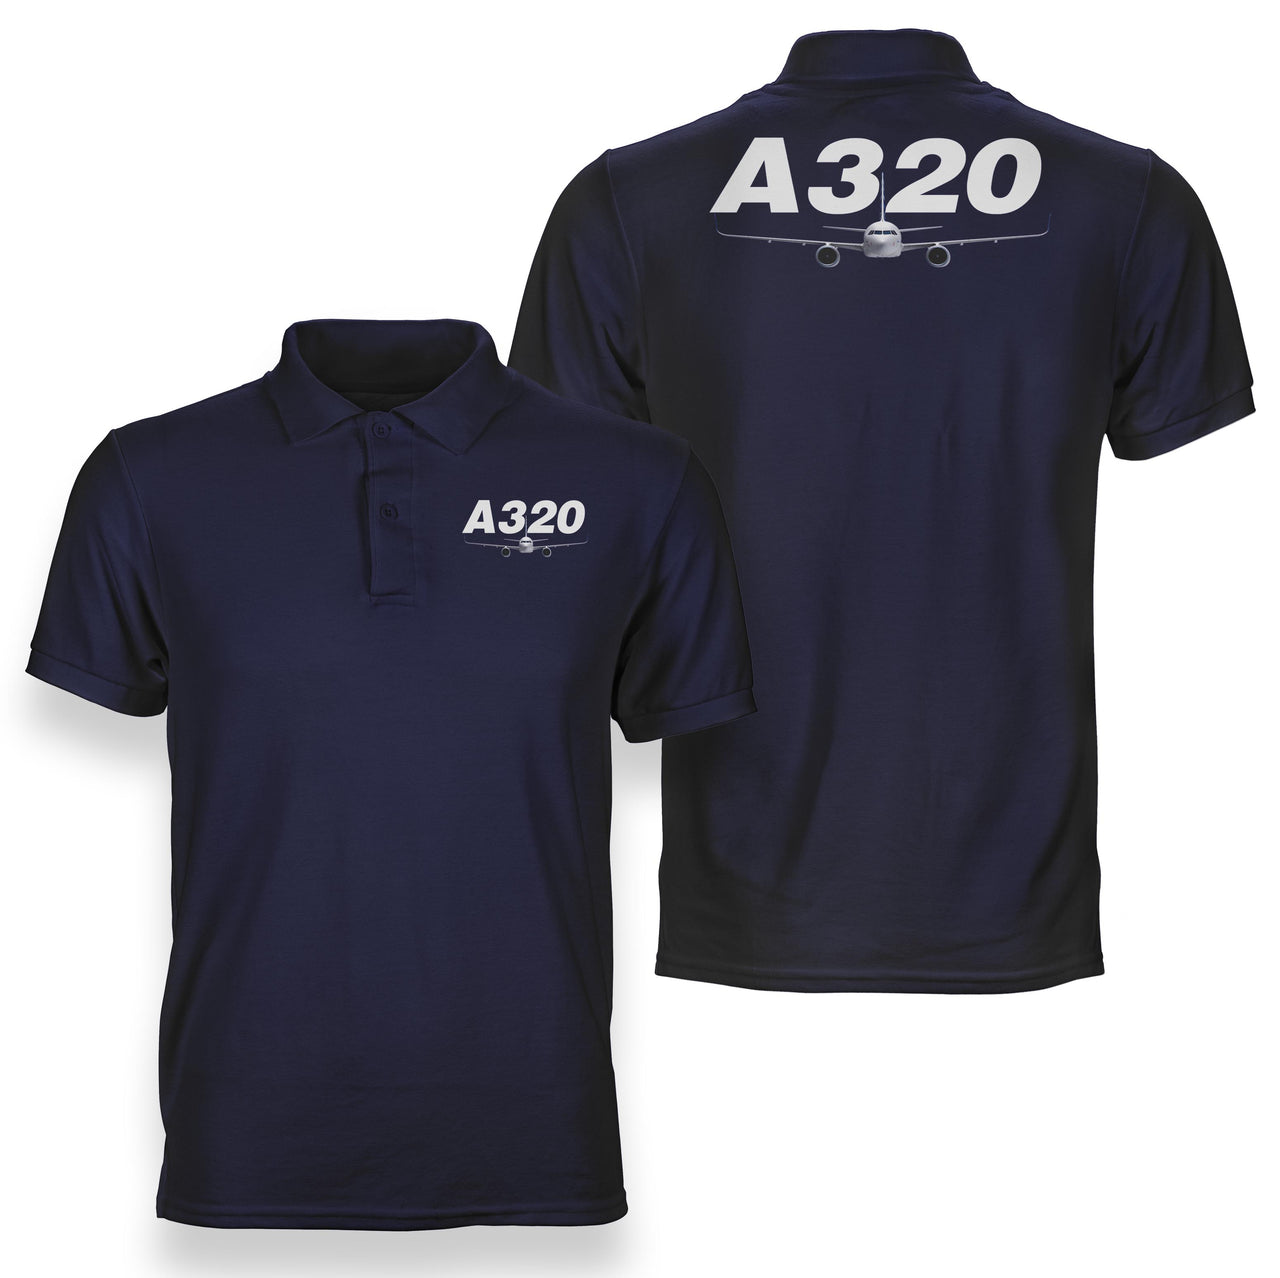 Super Airbus A320 Designed Double Side Polo T-Shirts